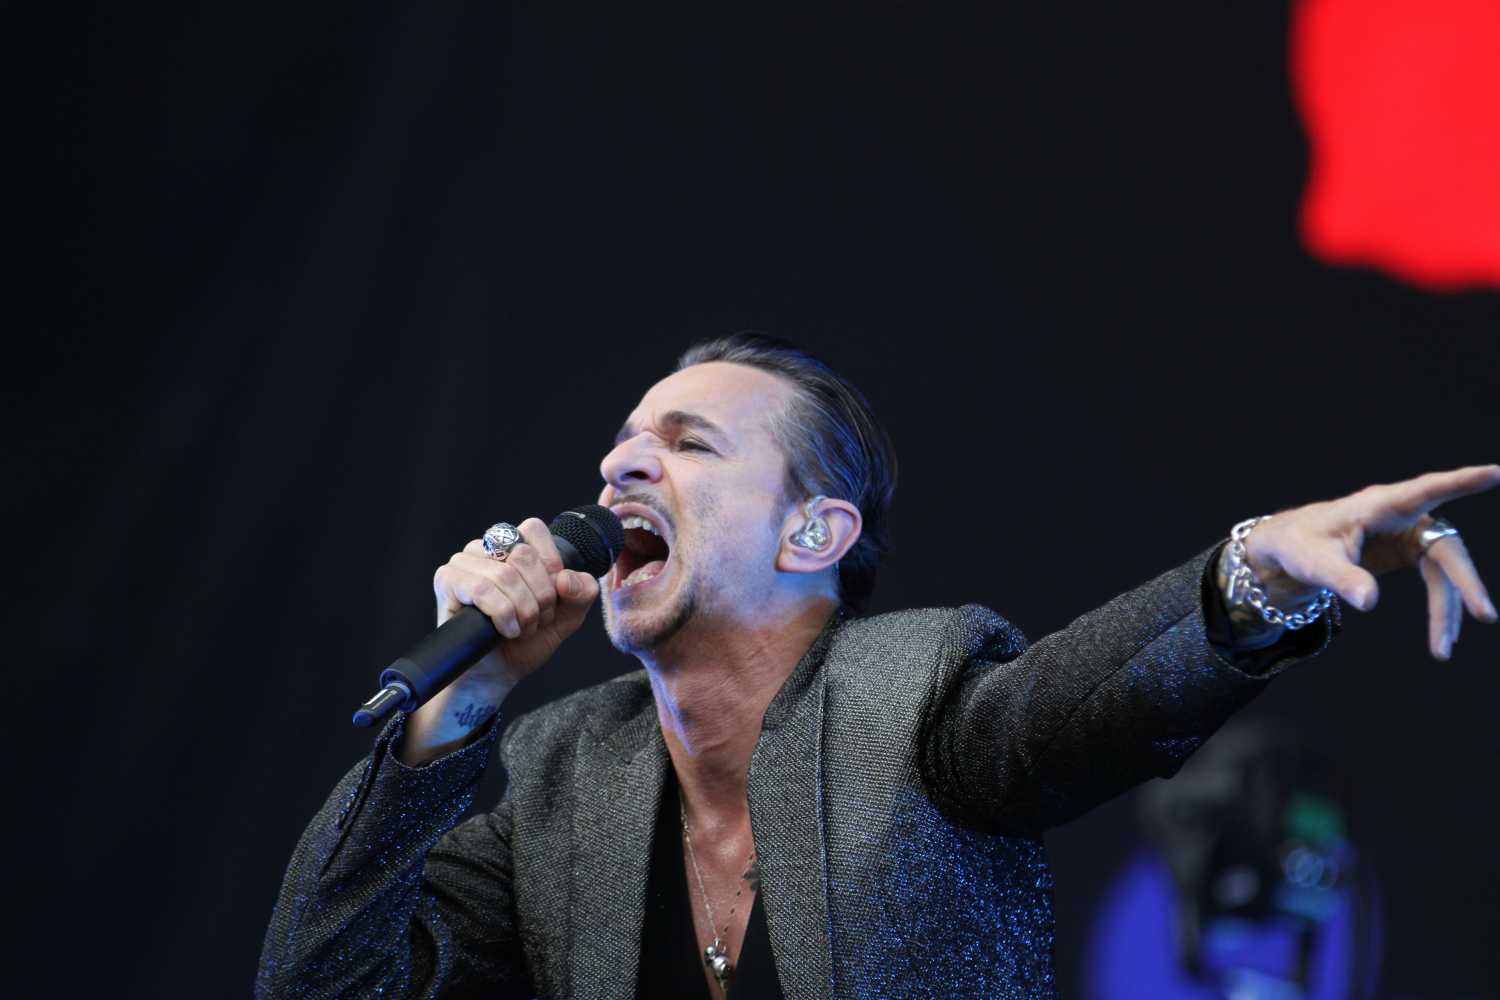 Frontman Dave Gahan uses a TG 1000 handheld transmitter with hypercardioid TG V70w interchangeable capsule